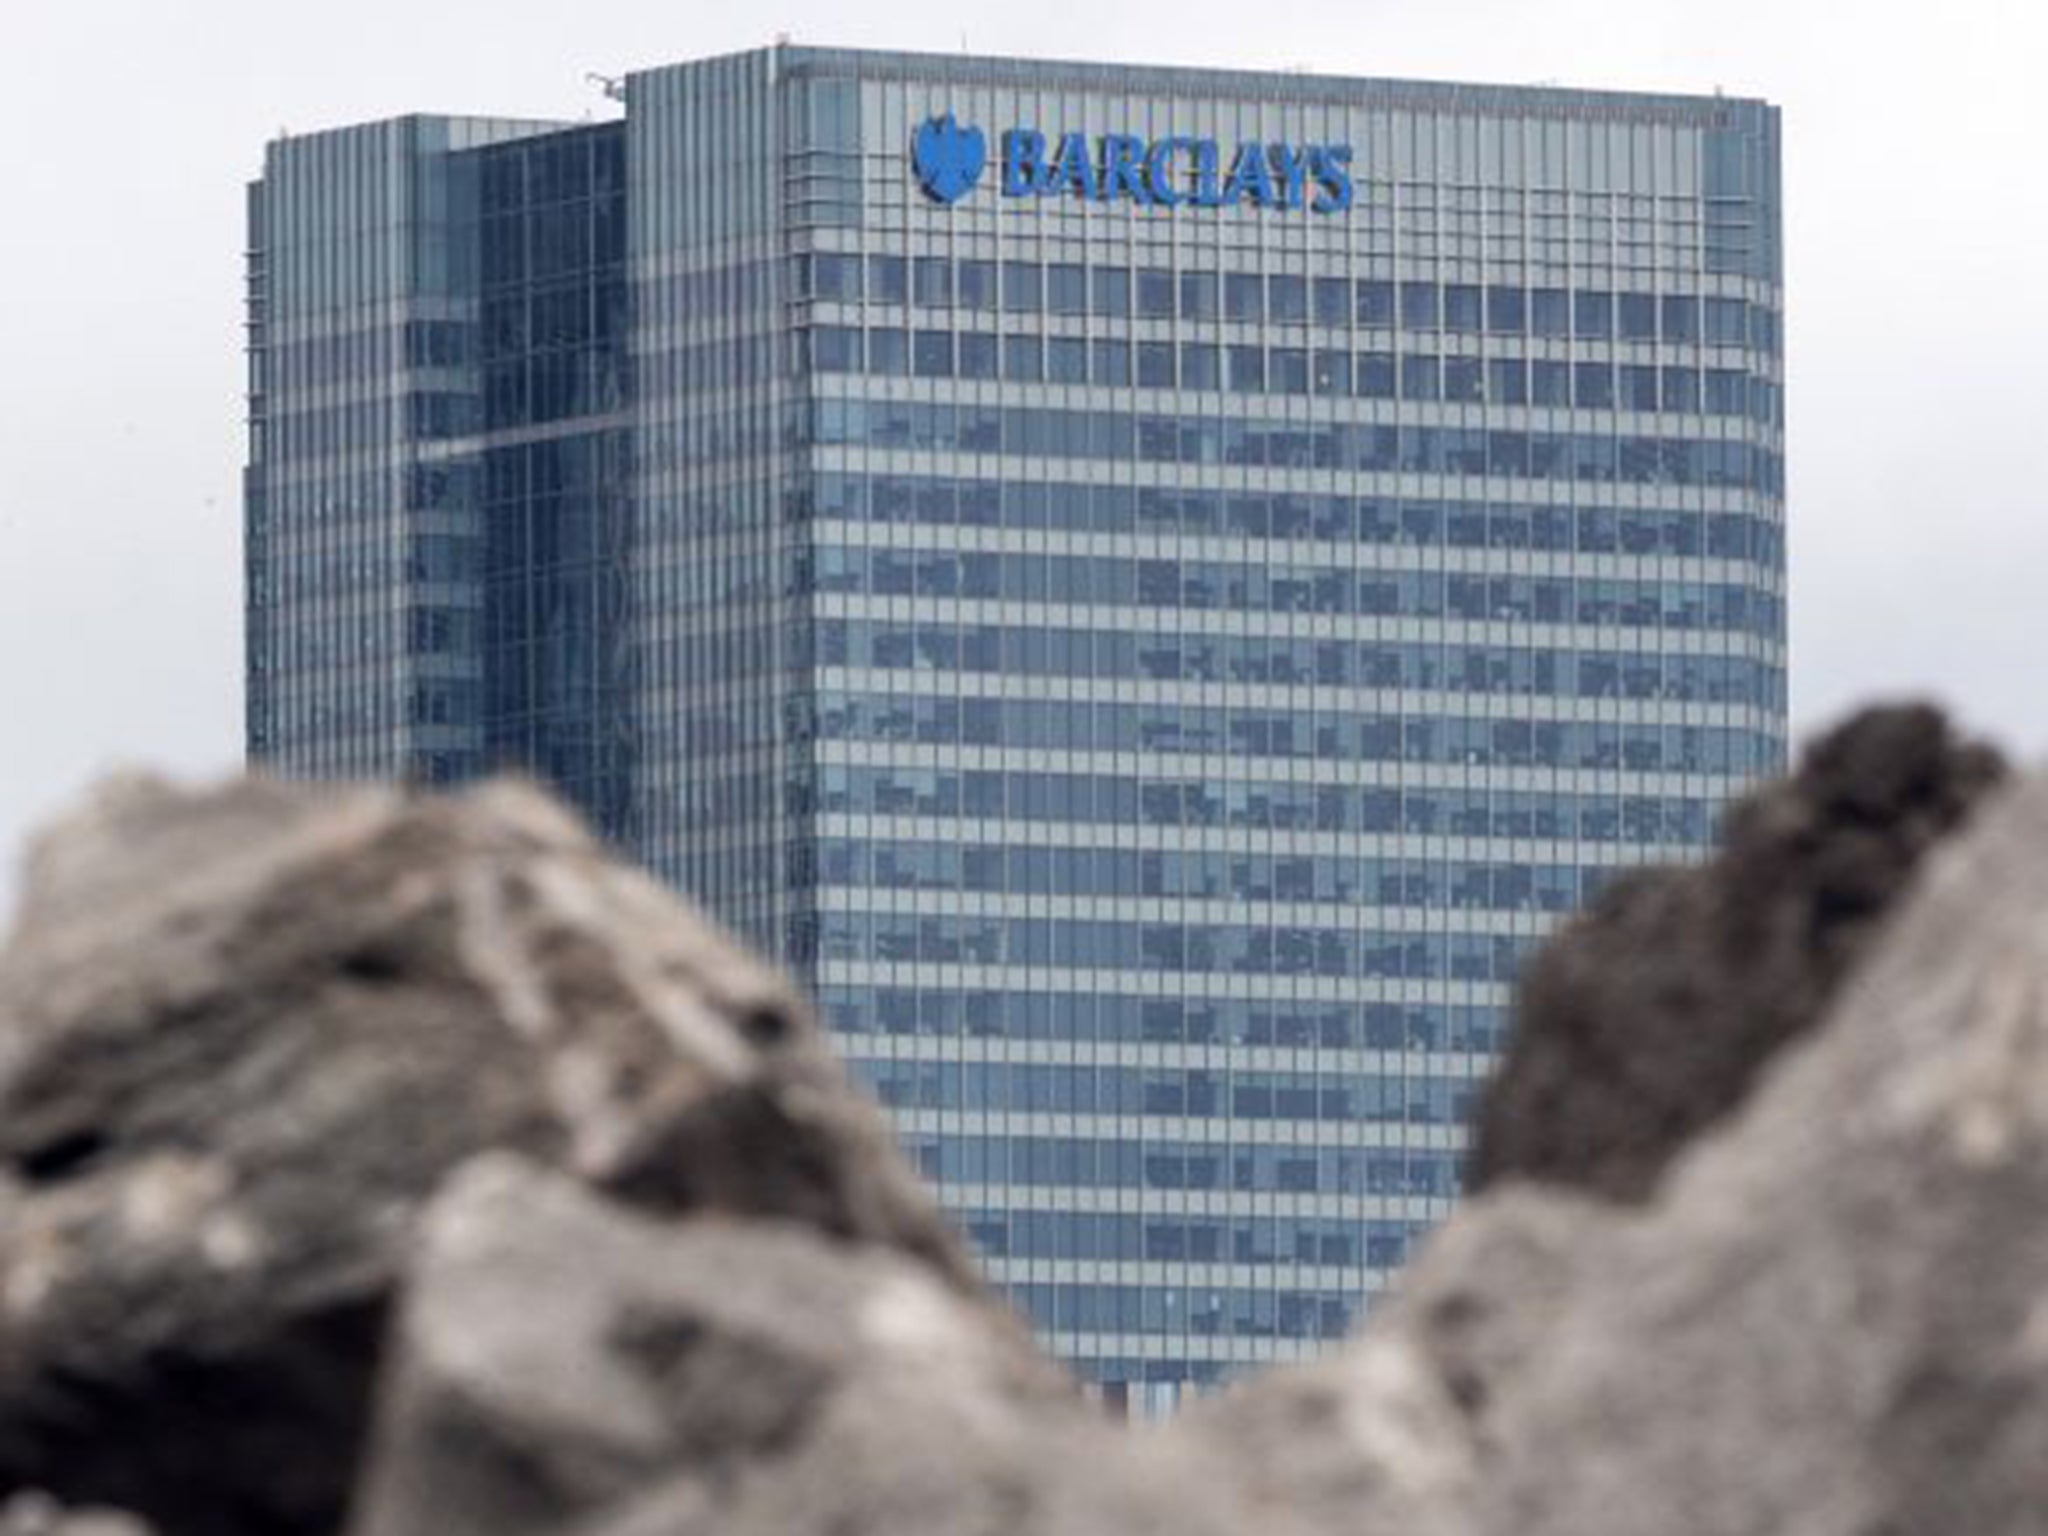 Barclays will pay more than $13.75 million including more than $10 million in restitution and a $3.75 million fine to settle US regulatory charges